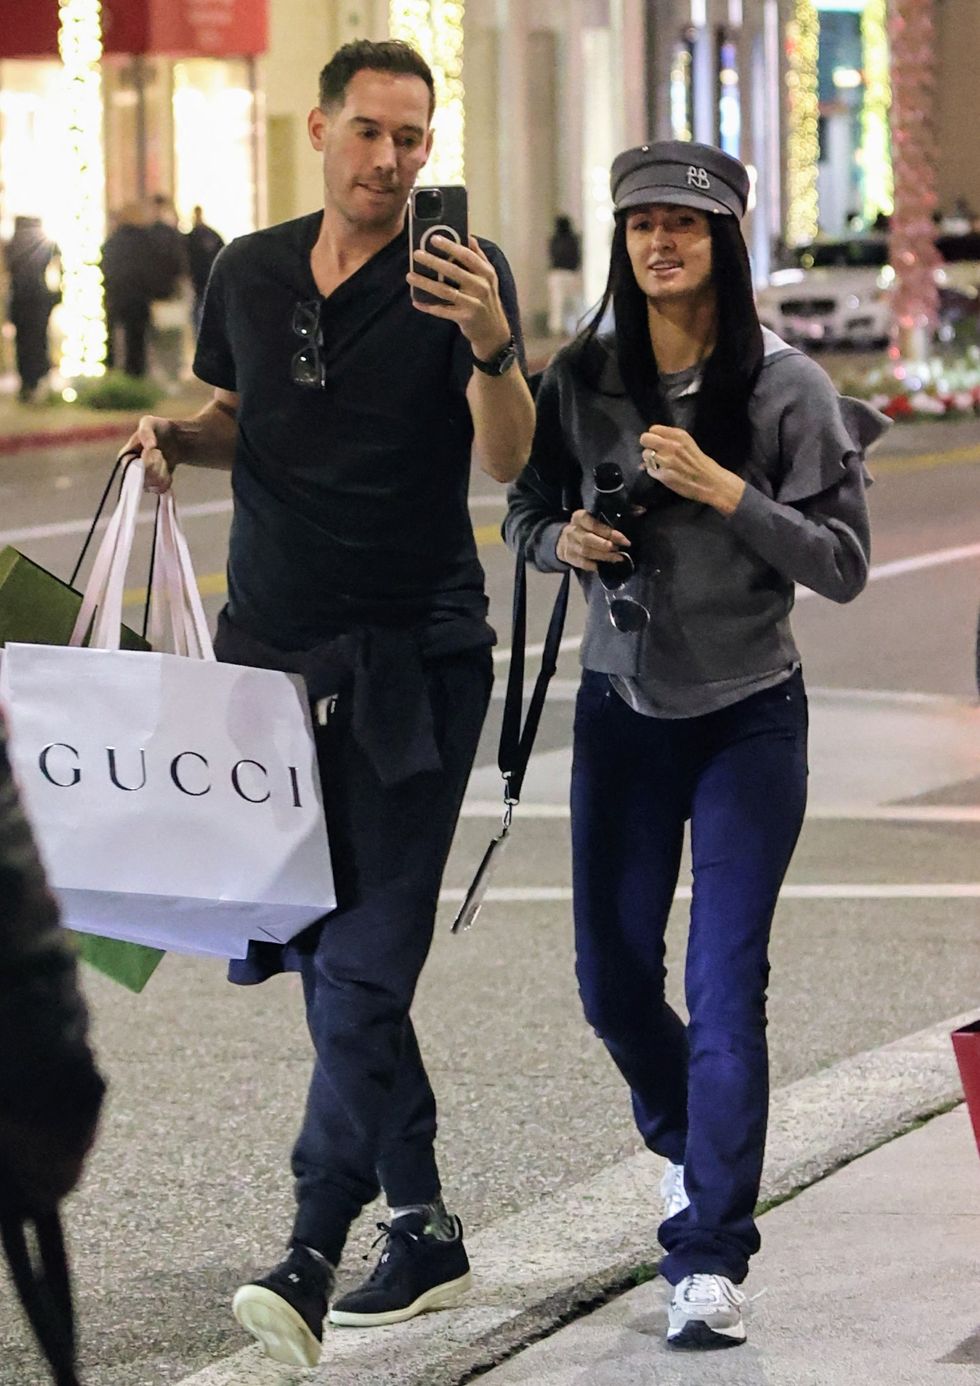 exclusive paris hilton disguises herself in long black wig and casual attire to get some holiday shopping done on rodeo drive at gucci 22 dec 2023 pictured paris hilton and carter reum photo credit apex mega themegaagencycom 1 888 505 6342